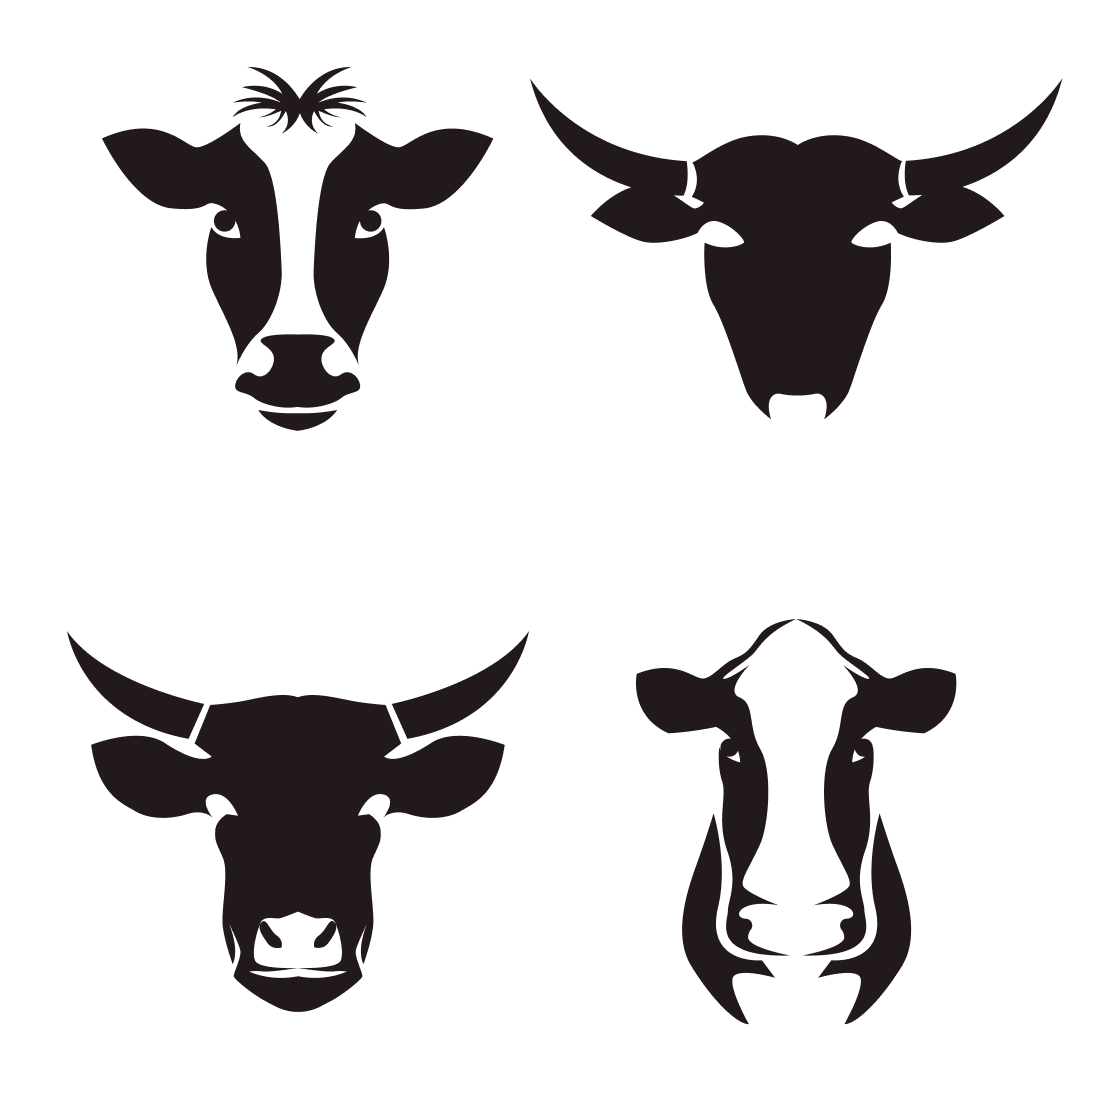 Black cow heads with white spots and a big nose.